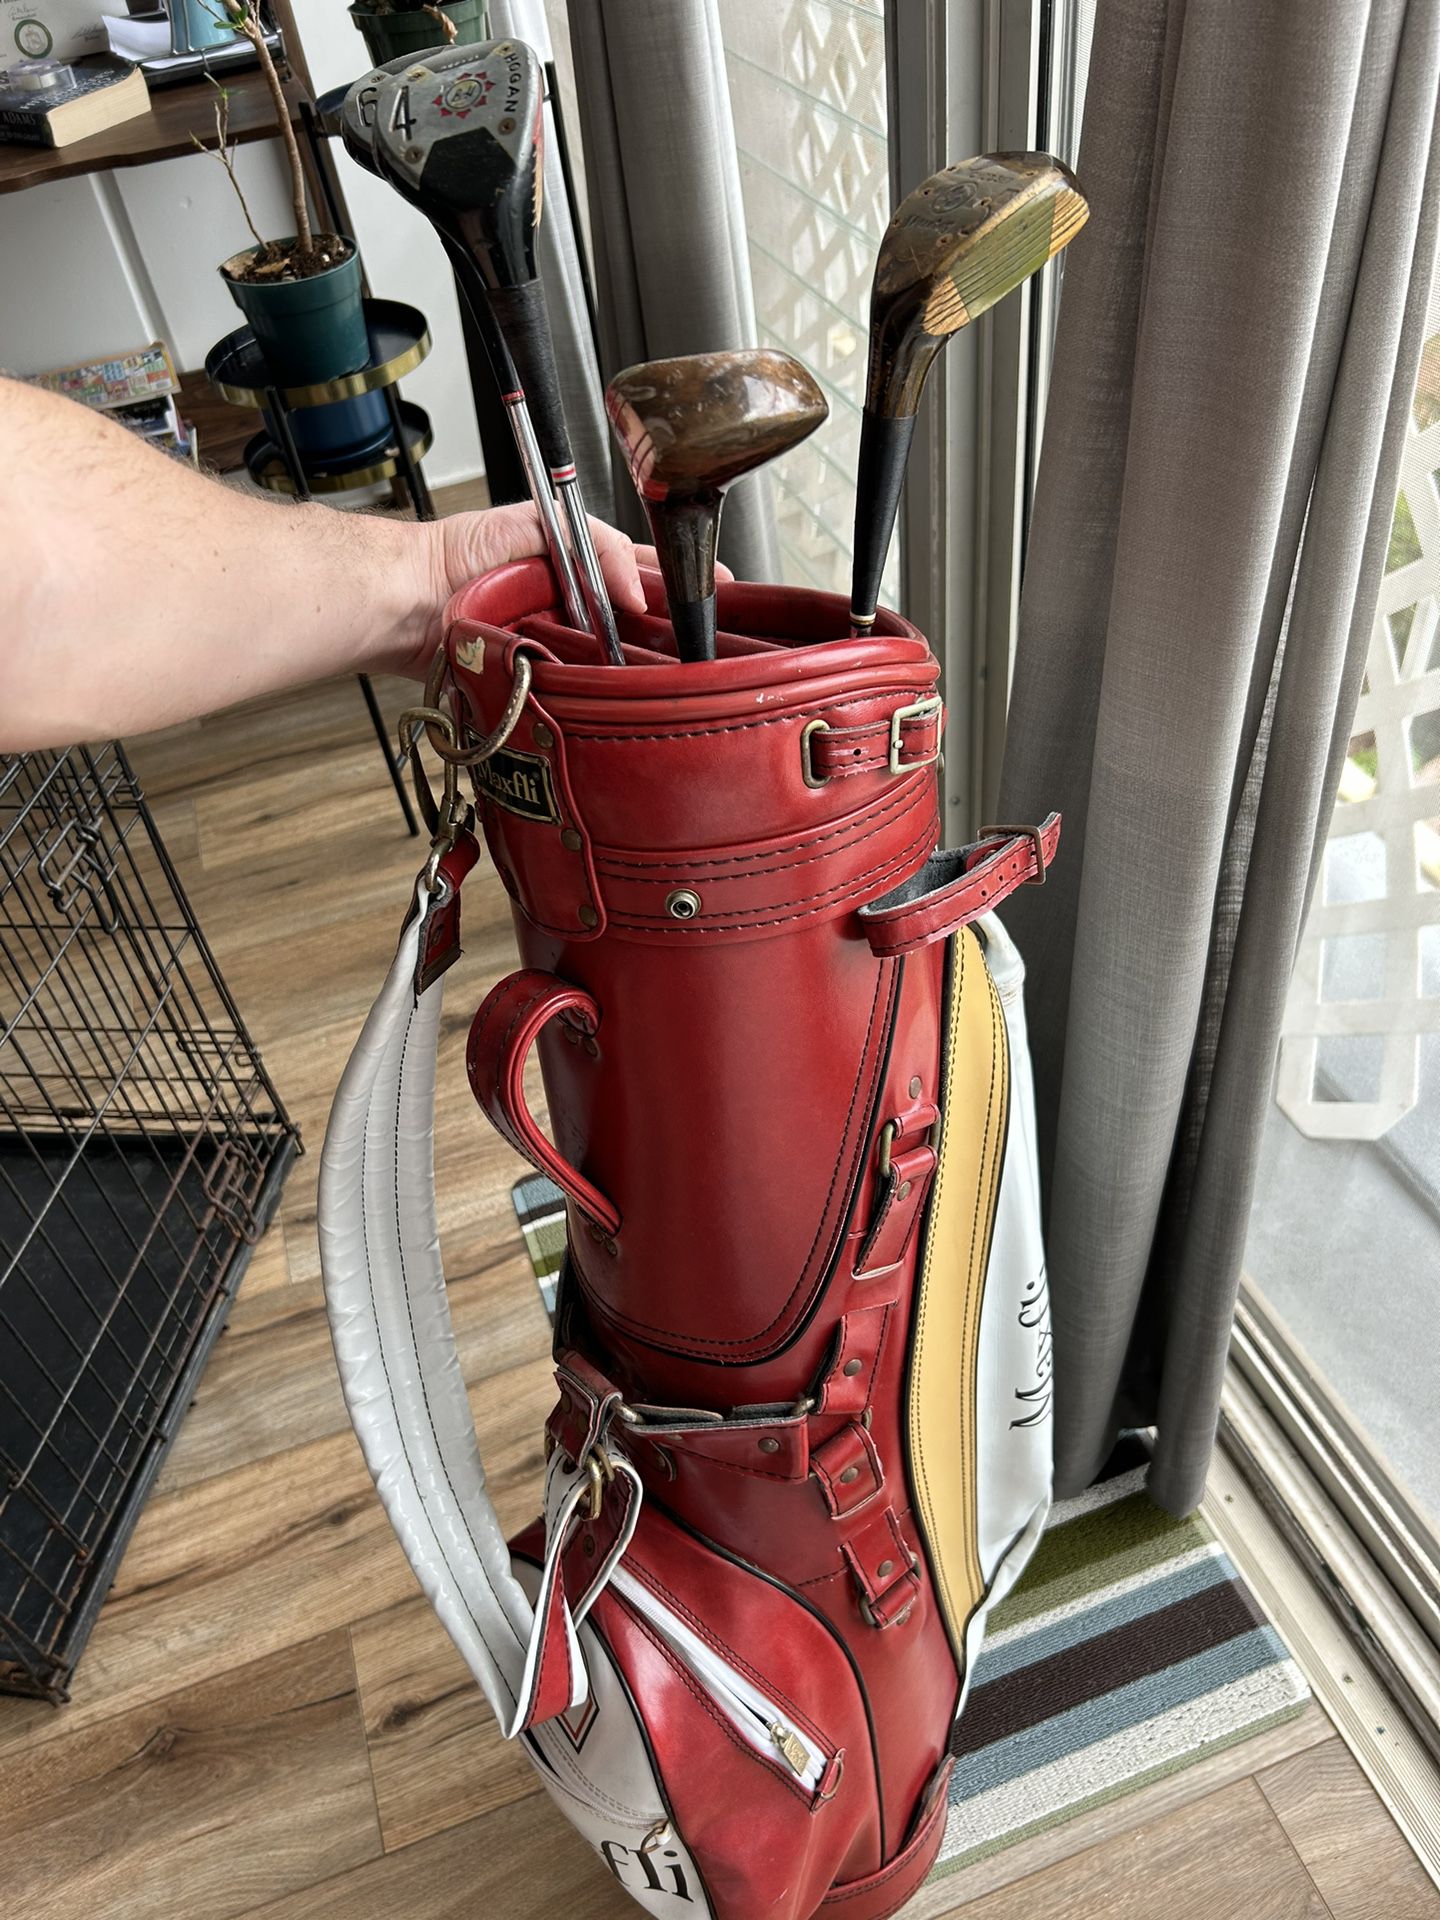 Vintage Golf Clubs with Bags  Vintage golf clubs, Golf bags